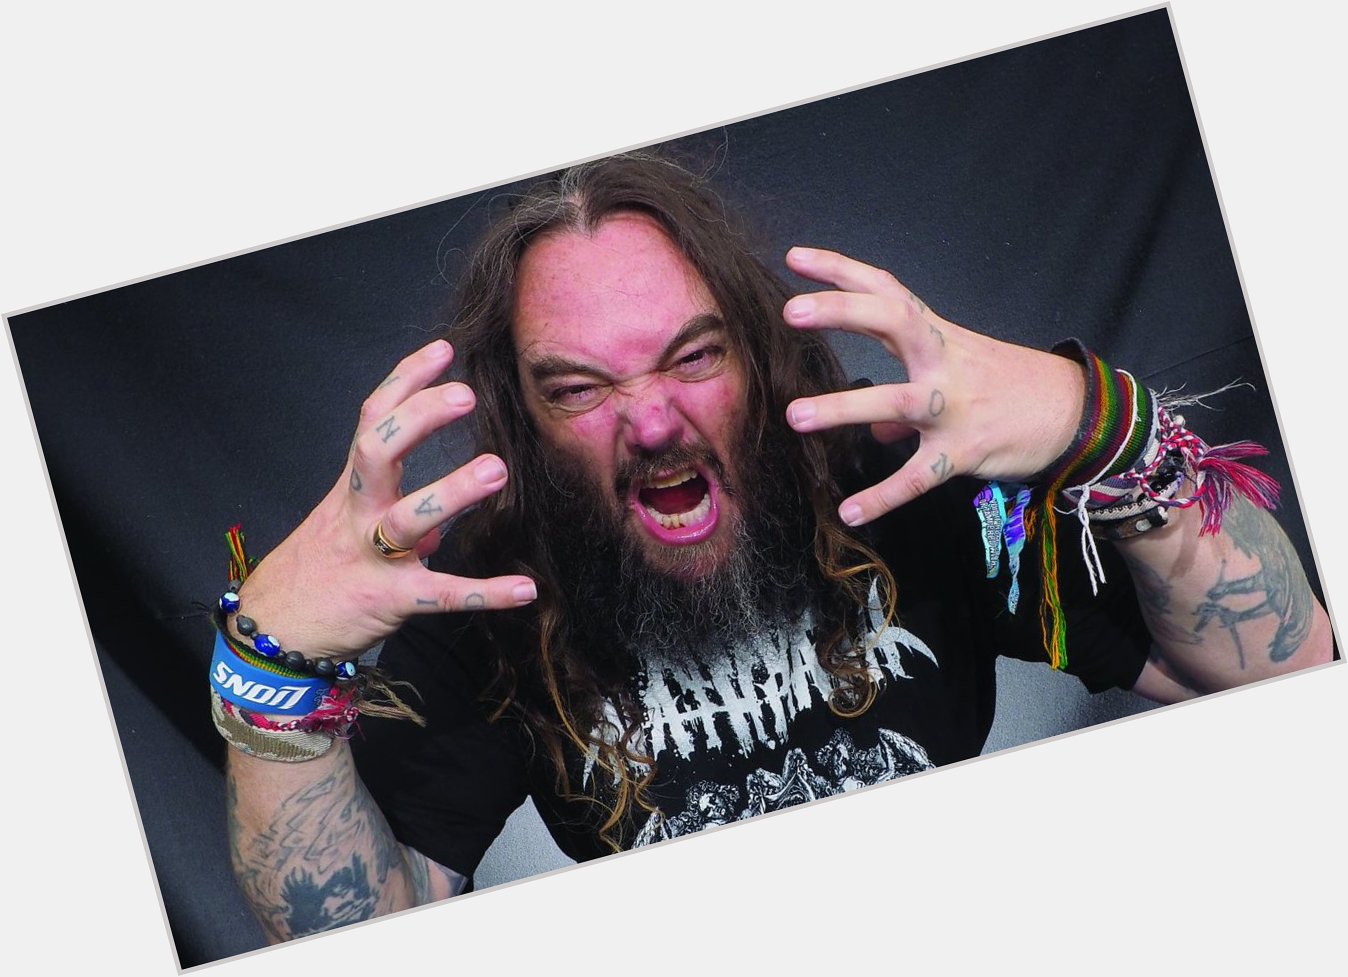 Happy Birthday to Max Cavalera, who you can find in Soulfly, Cavalera Conspiracy, and Killer Be Killed. 